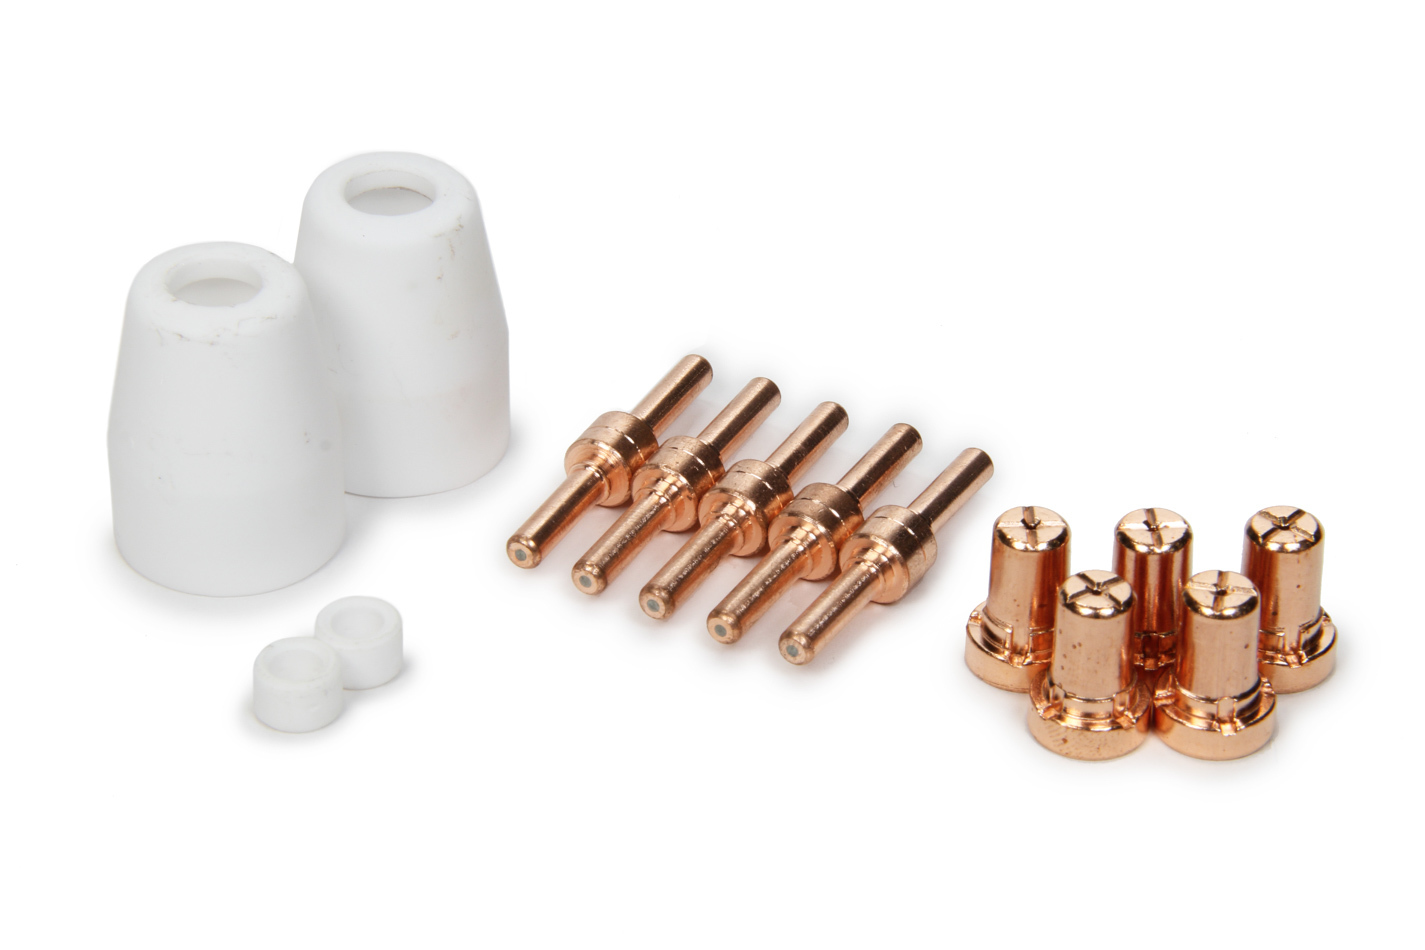 Woodward Fab PL-KIT Plasma Cutter Consumables Kit, Cups / Diffusers / Electrodes / Nozzles, Woodward Plasma Cutter, Kit